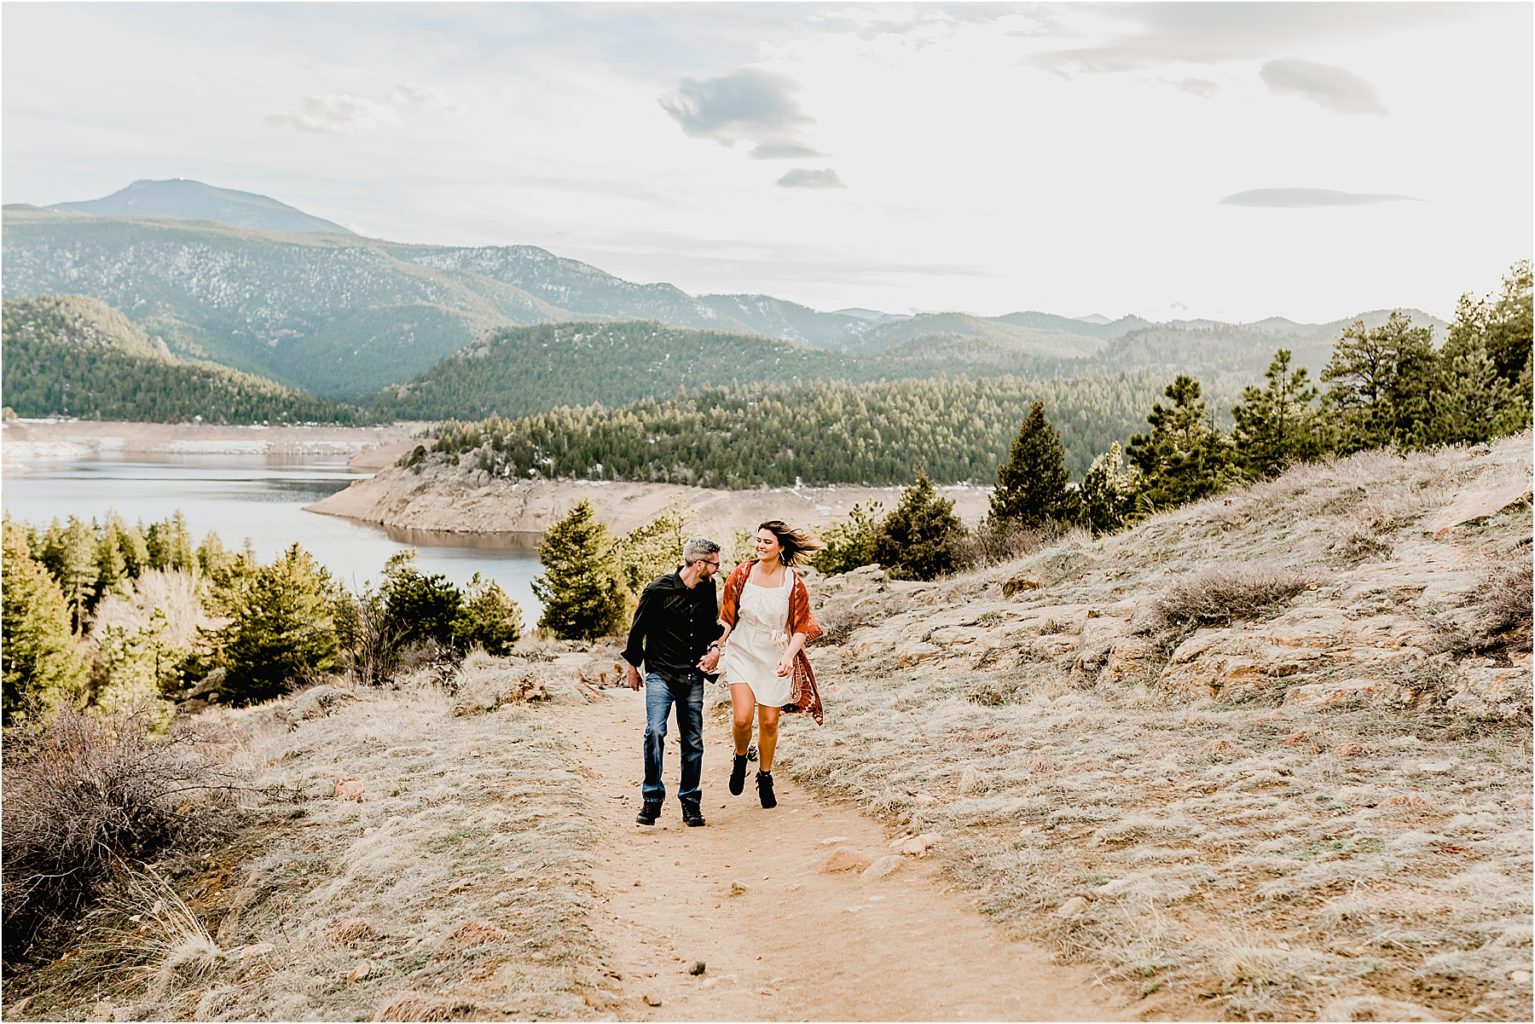 Marissa and Casey's adventure anniversary session in boulder, colorado. We ran around this beautiful mountain location and shared so many laughs!